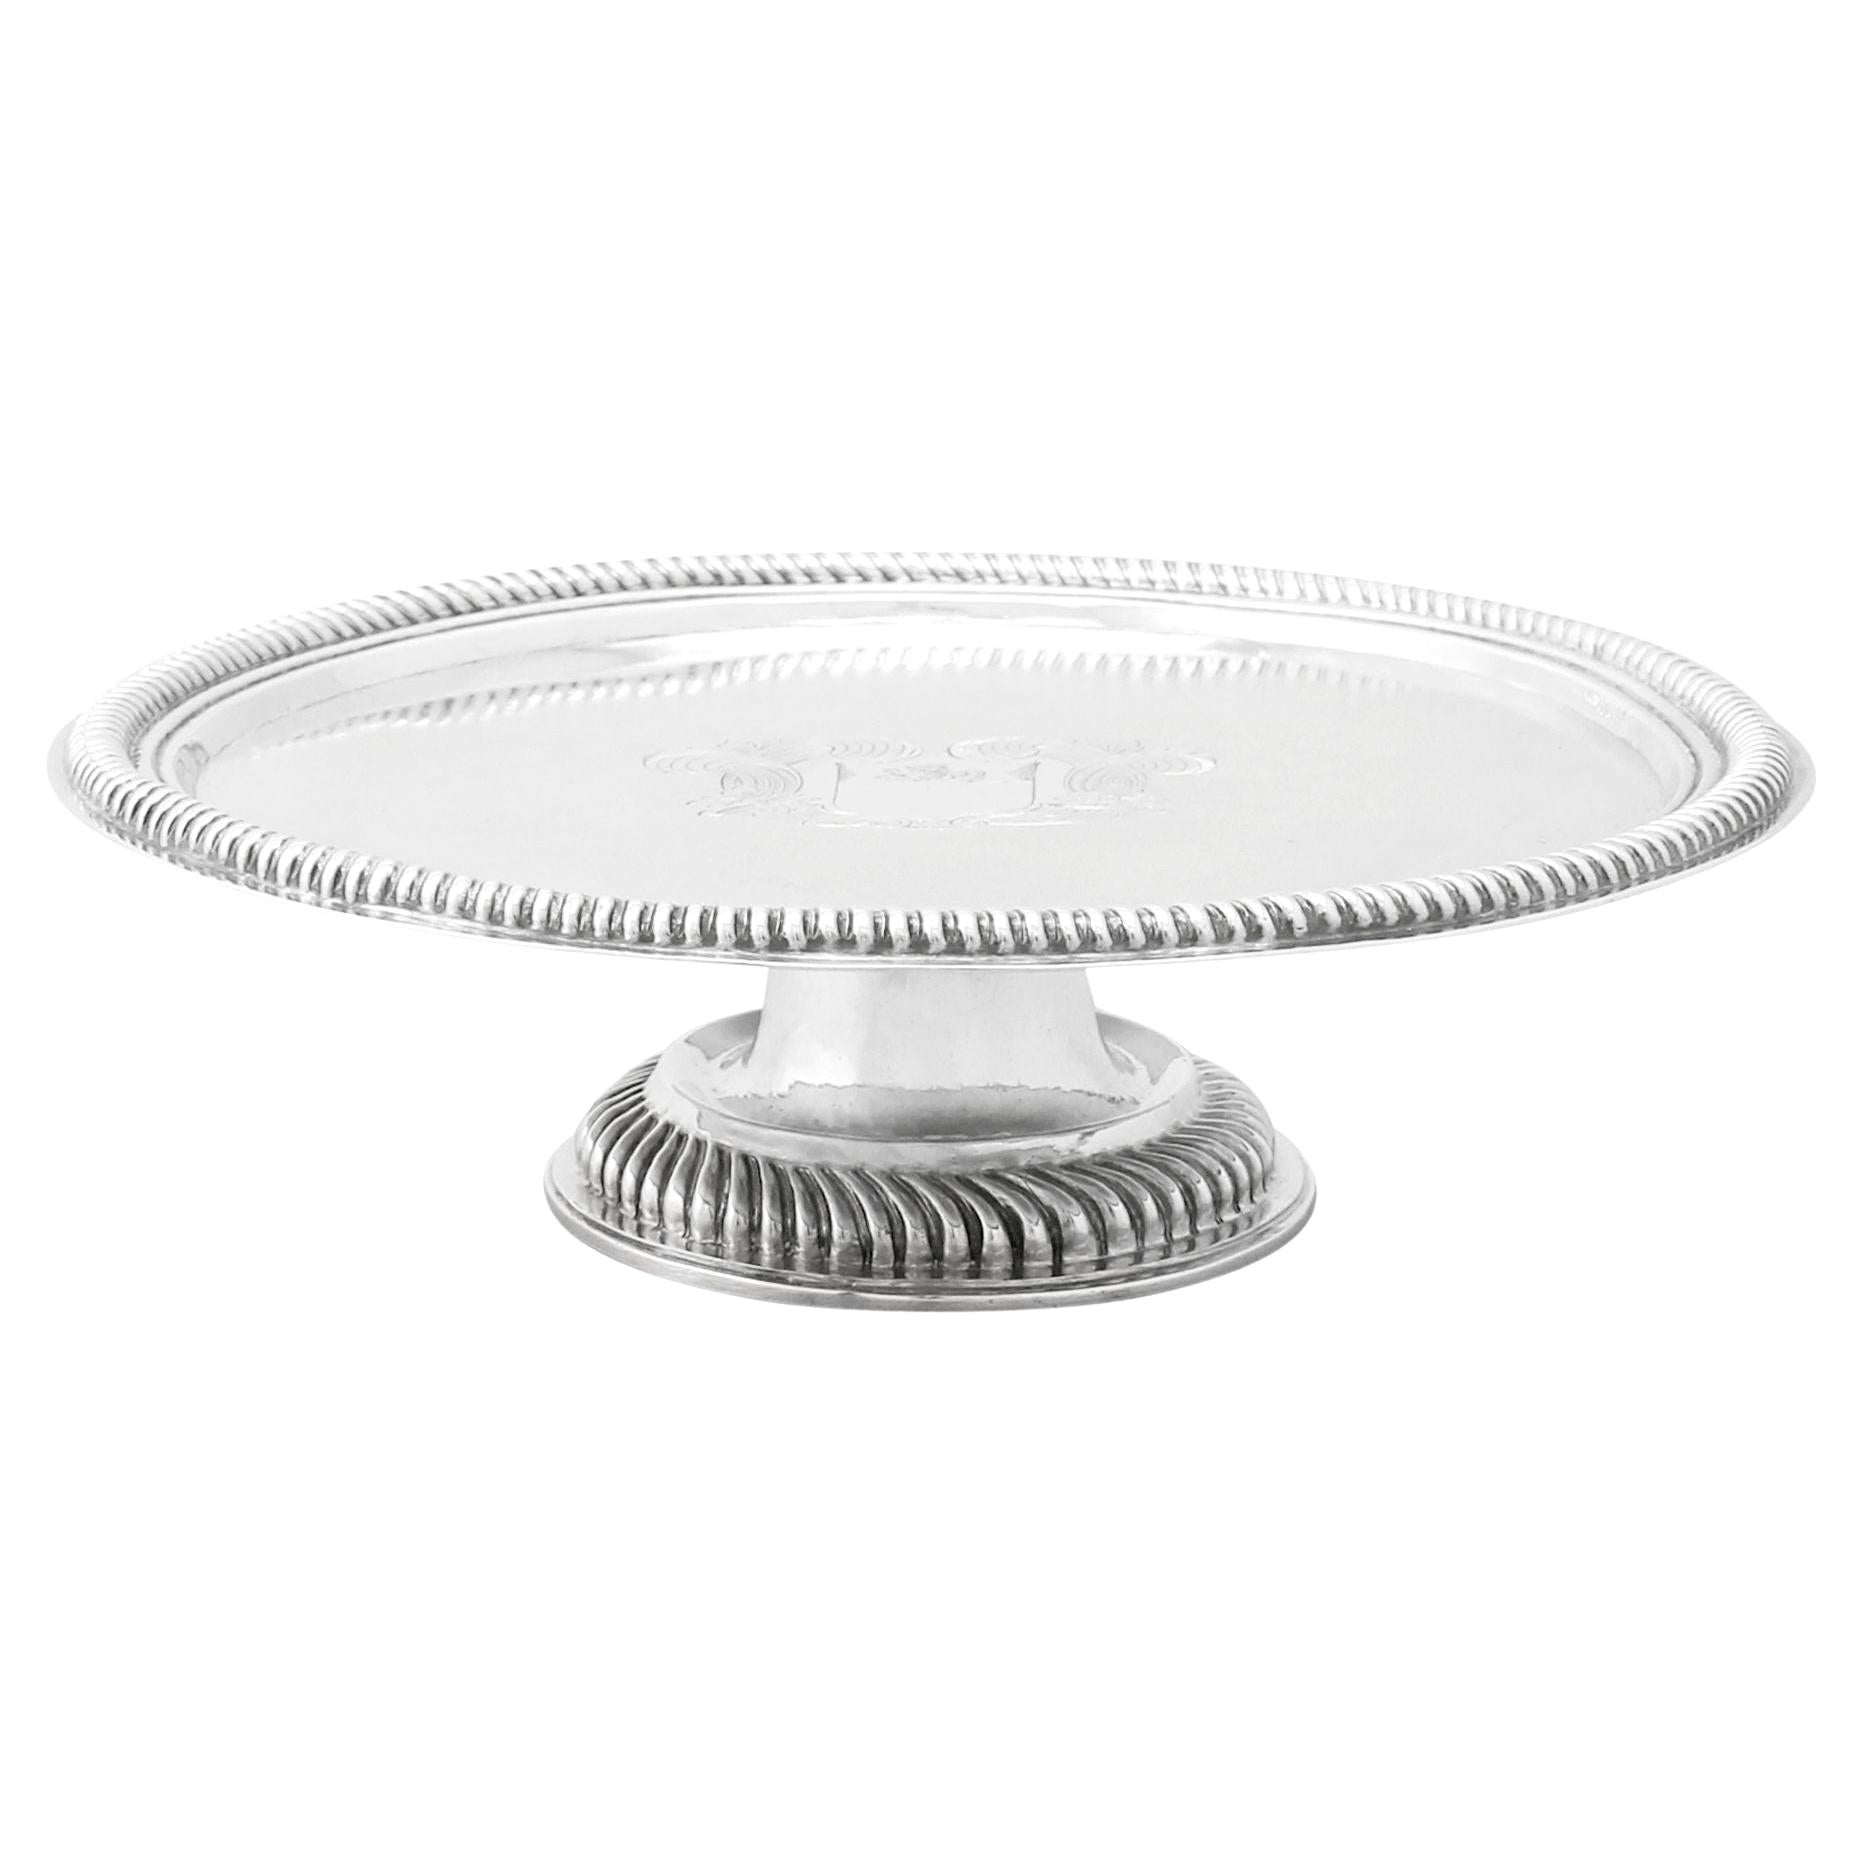 What is a silver tazza?